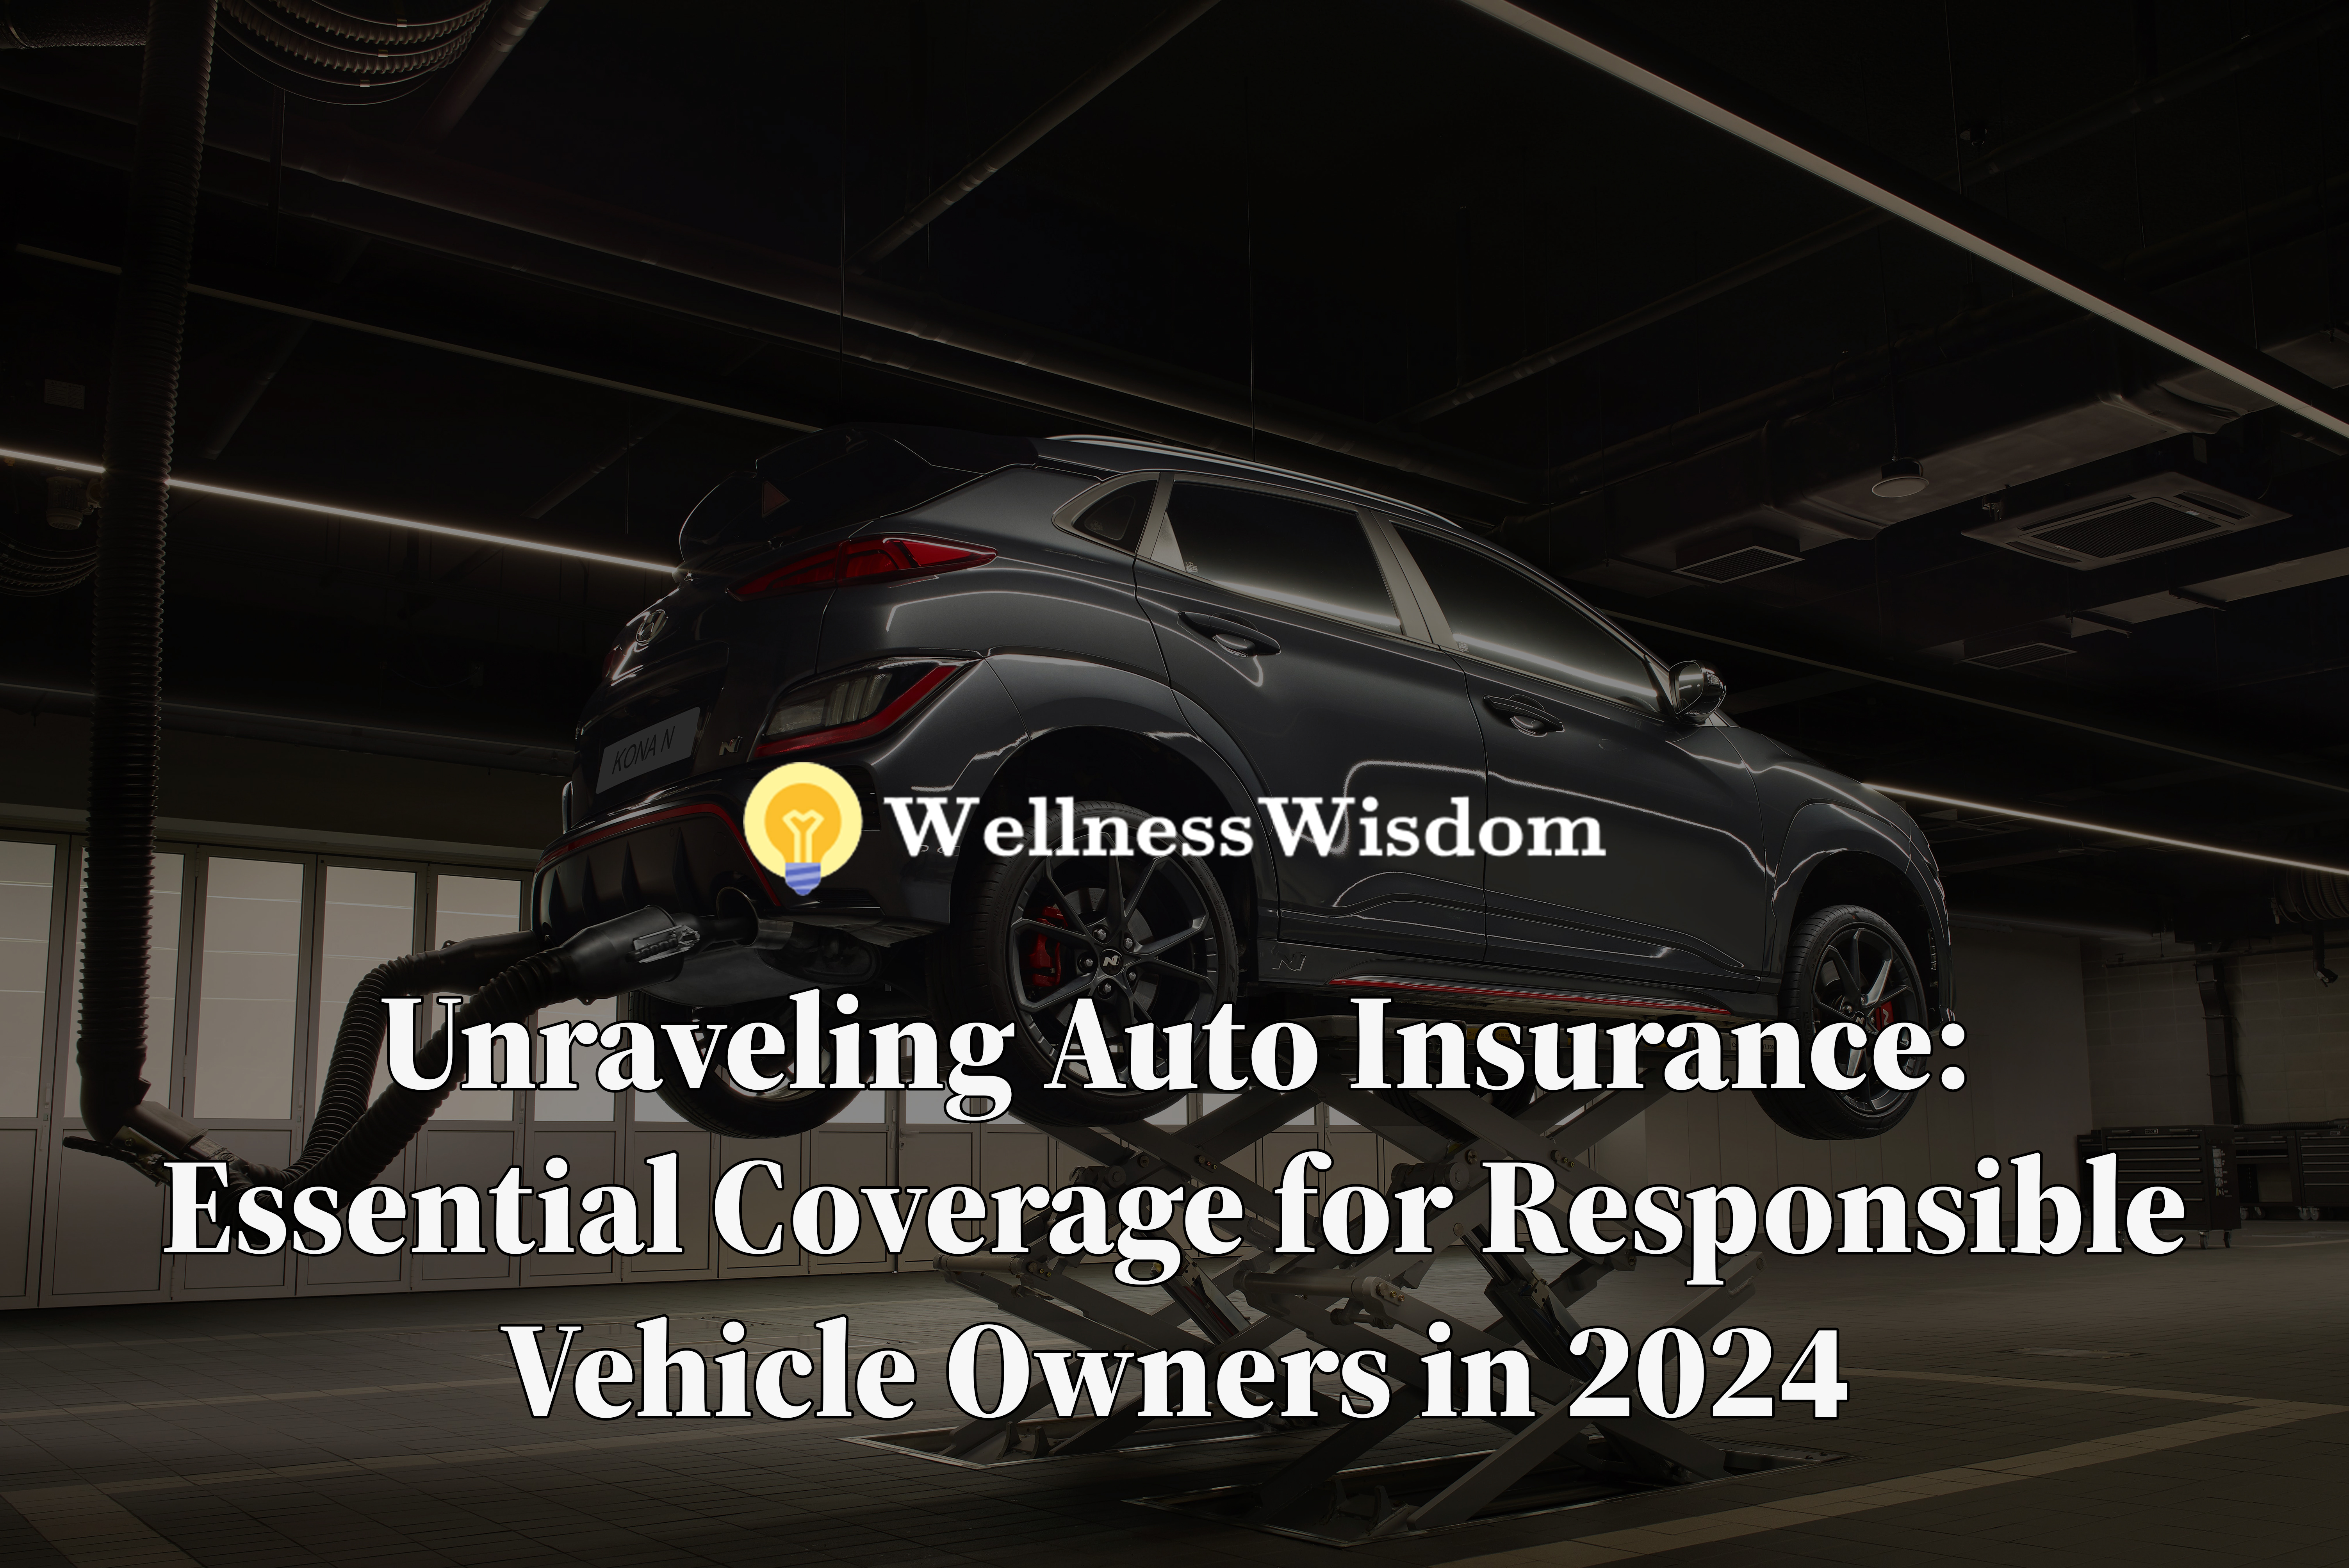 auto insurance, car insurance, vehicle insurance, liability coverage, collision coverage, comprehensive coverage, personal injury protection, PIP, uninsured motorist coverage, underinsured motorist coverage, insurance coverage, financial protection